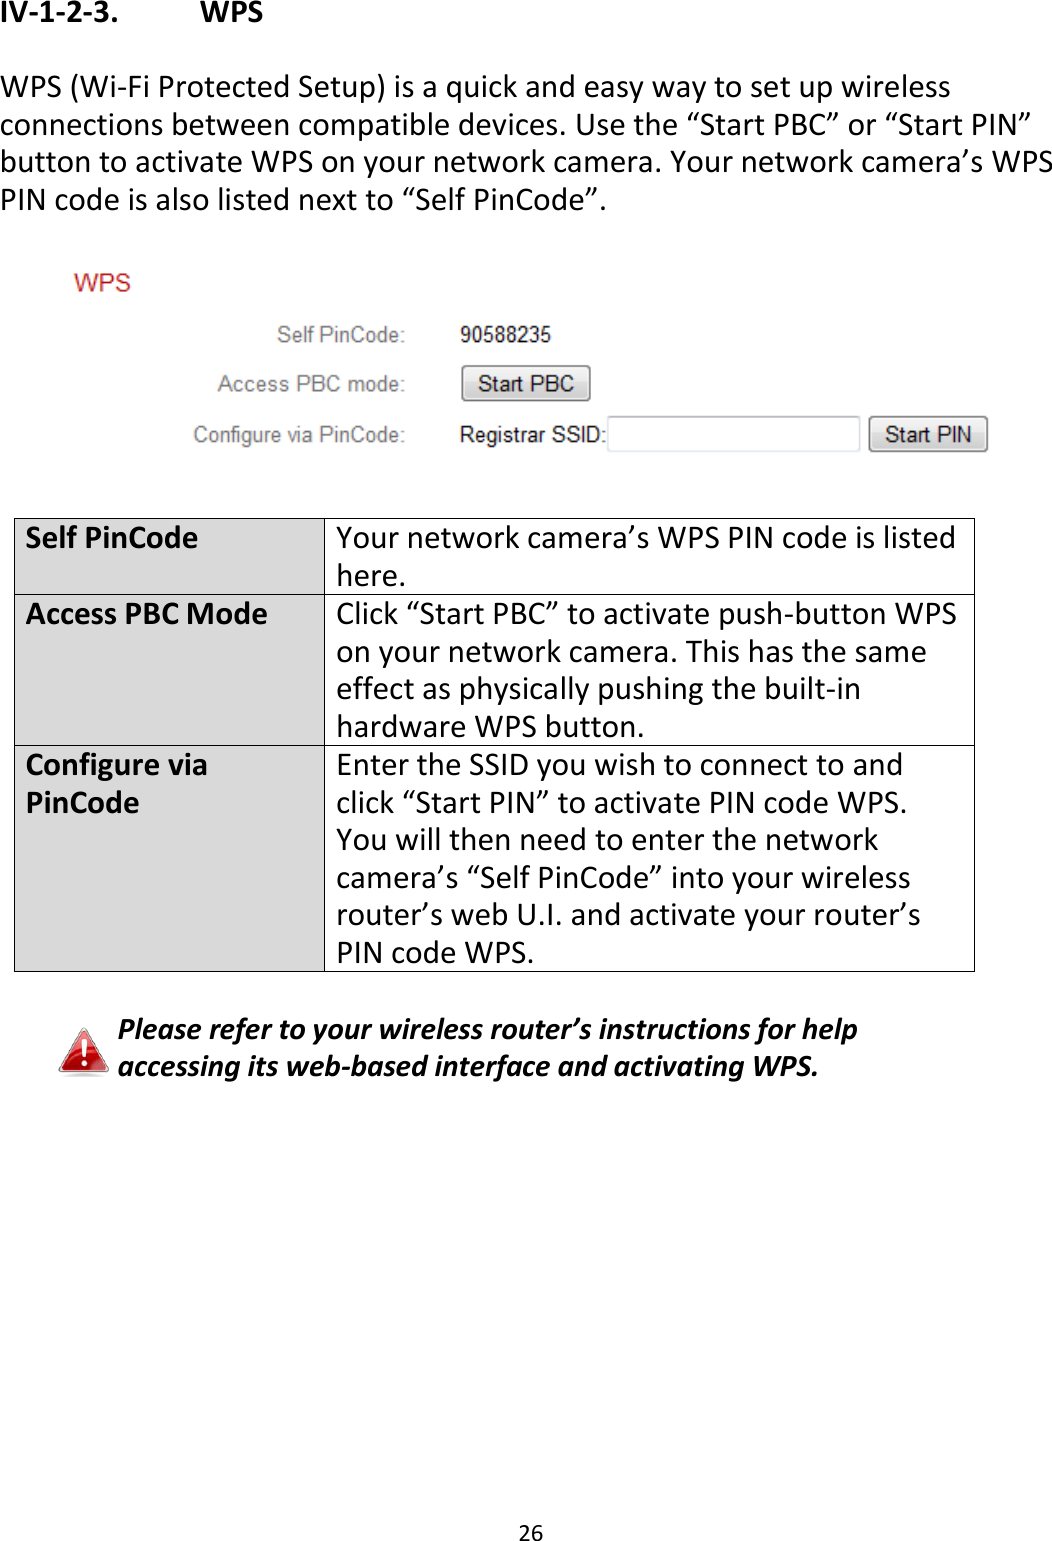 26  IV-1-2-3.    WPS  WPS (Wi-Fi Protected Setup) is a quick and easy way to set up wireless connections between compatible devices. Use the “Start PBC” or “Start PIN” button to activate WPS on your network camera. Your network camera’s WPS PIN code is also listed next to “Self PinCode”.    Self PinCode Your network camera’s WPS PIN code is listed here. Access PBC Mode Click “Start PBC” to activate push-button WPS on your network camera. This has the same effect as physically pushing the built-in hardware WPS button. Configure via PinCode Enter the SSID you wish to connect to and click “Start PIN” to activate PIN code WPS. You will then need to enter the network camera’s “Self PinCode” into your wireless router’s web U.I. and activate your router’s PIN code WPS.  Please refer to your wireless router’s instructions for help accessing its web-based interface and activating WPS.   